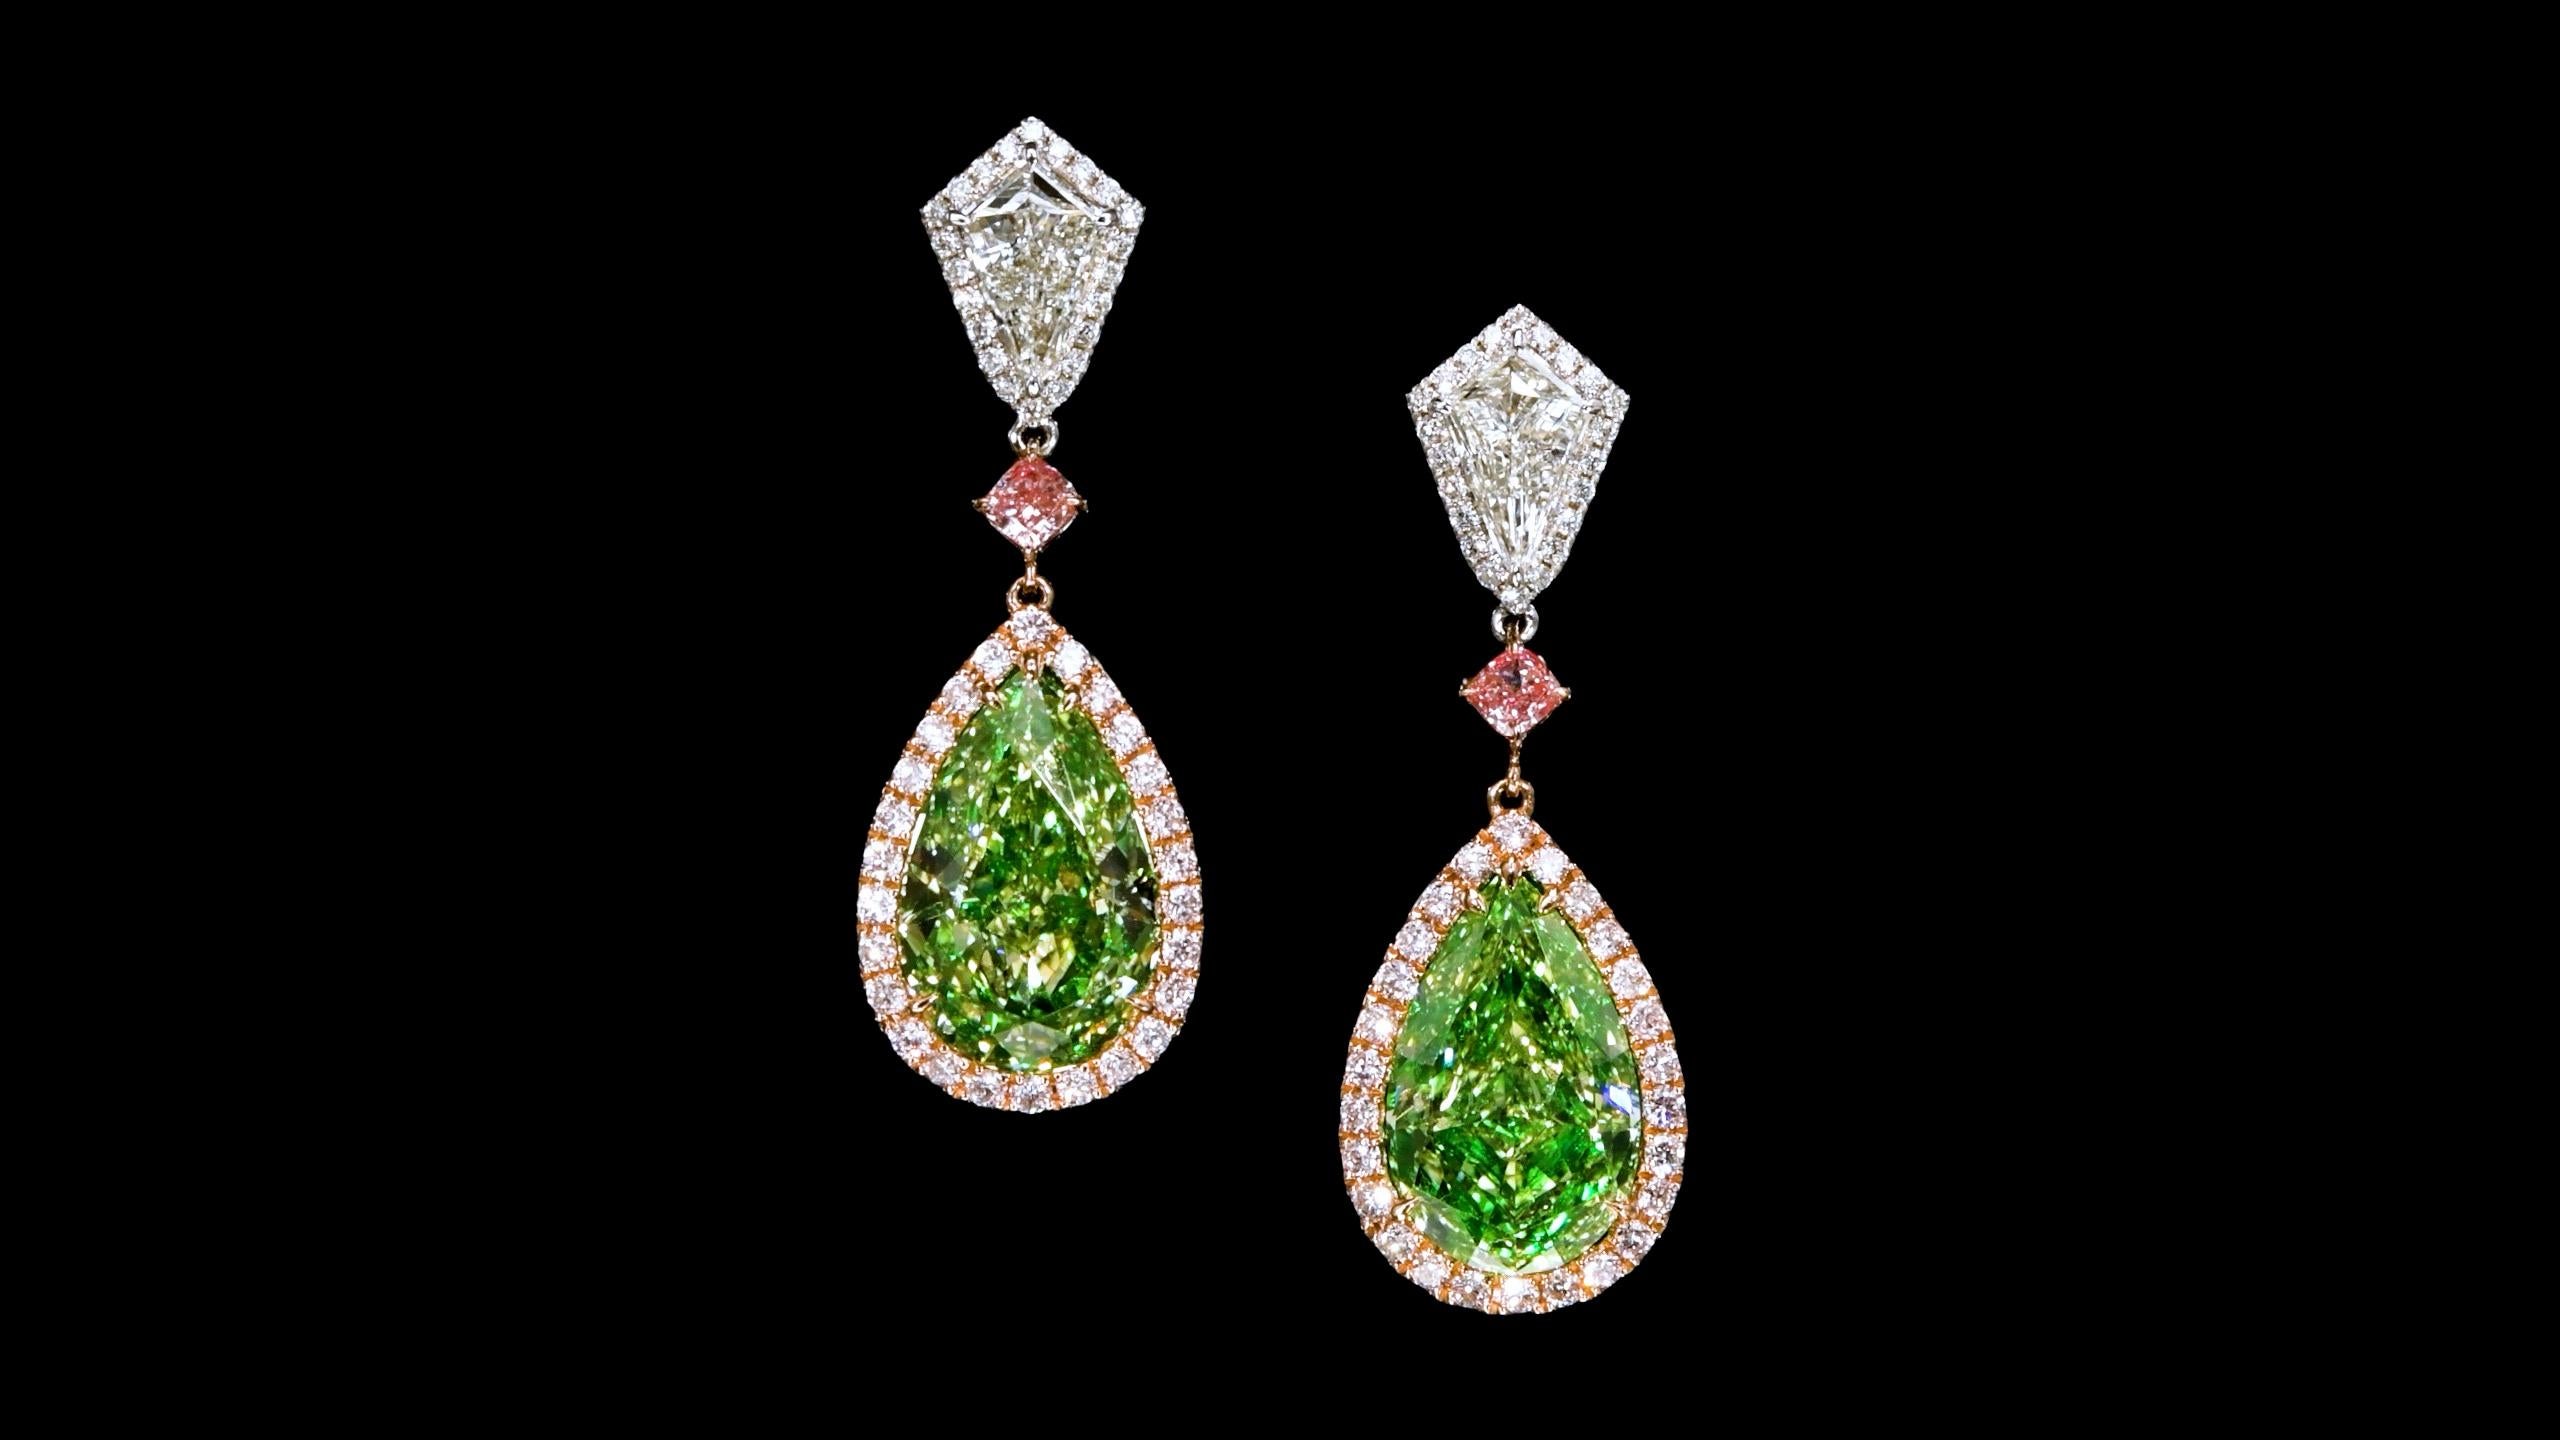 From Emilio Jewelry New York, a well known and trusted dealer located on New York's iconic Fifth Avenue. 

We are one of the few designers who are experts in Natural Green diamonds, and can bring out their best potential in our hand made custom